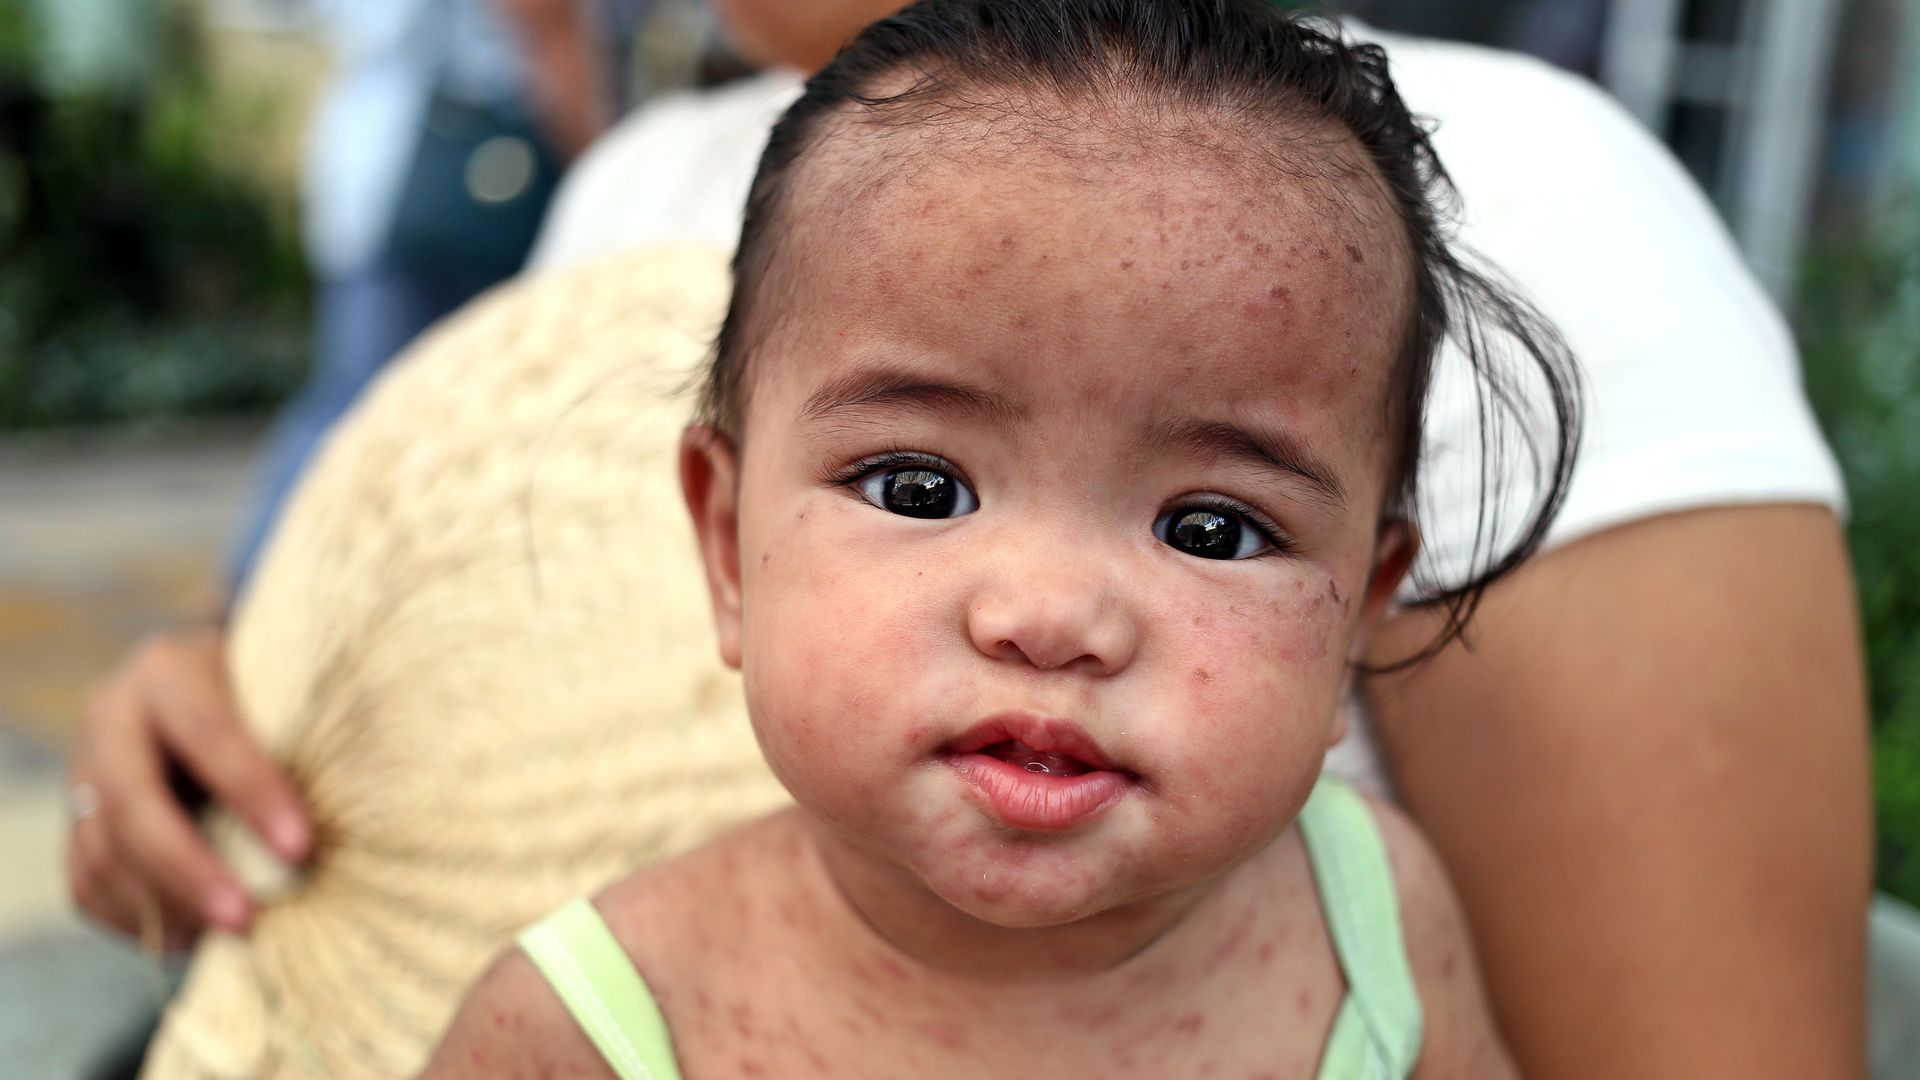 Toddler with measles in the Philippines